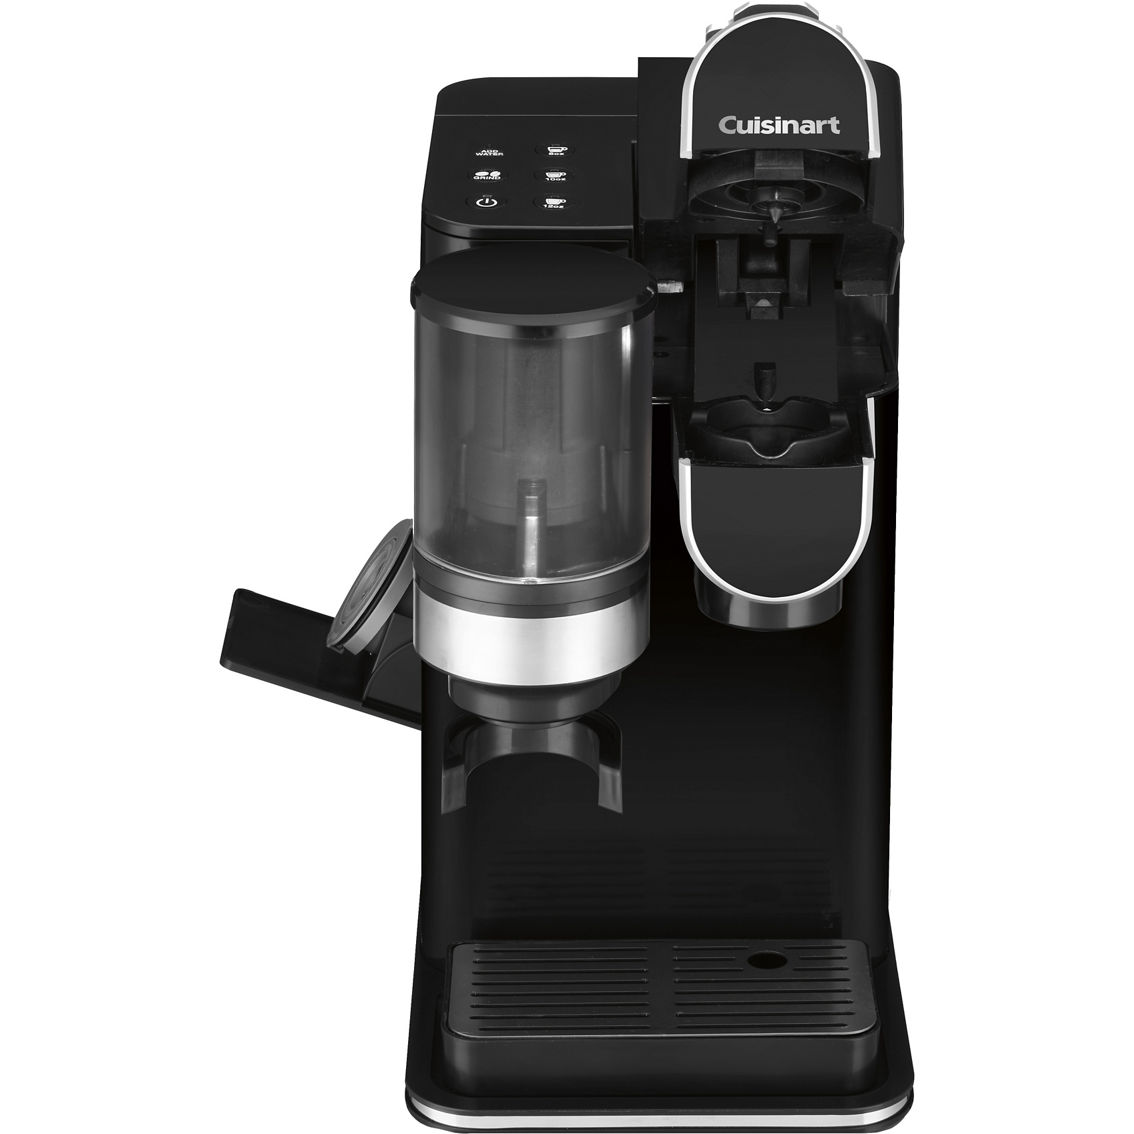 Cuisinart Grind and Brew Single Serve Coffeemaker - Image 2 of 9